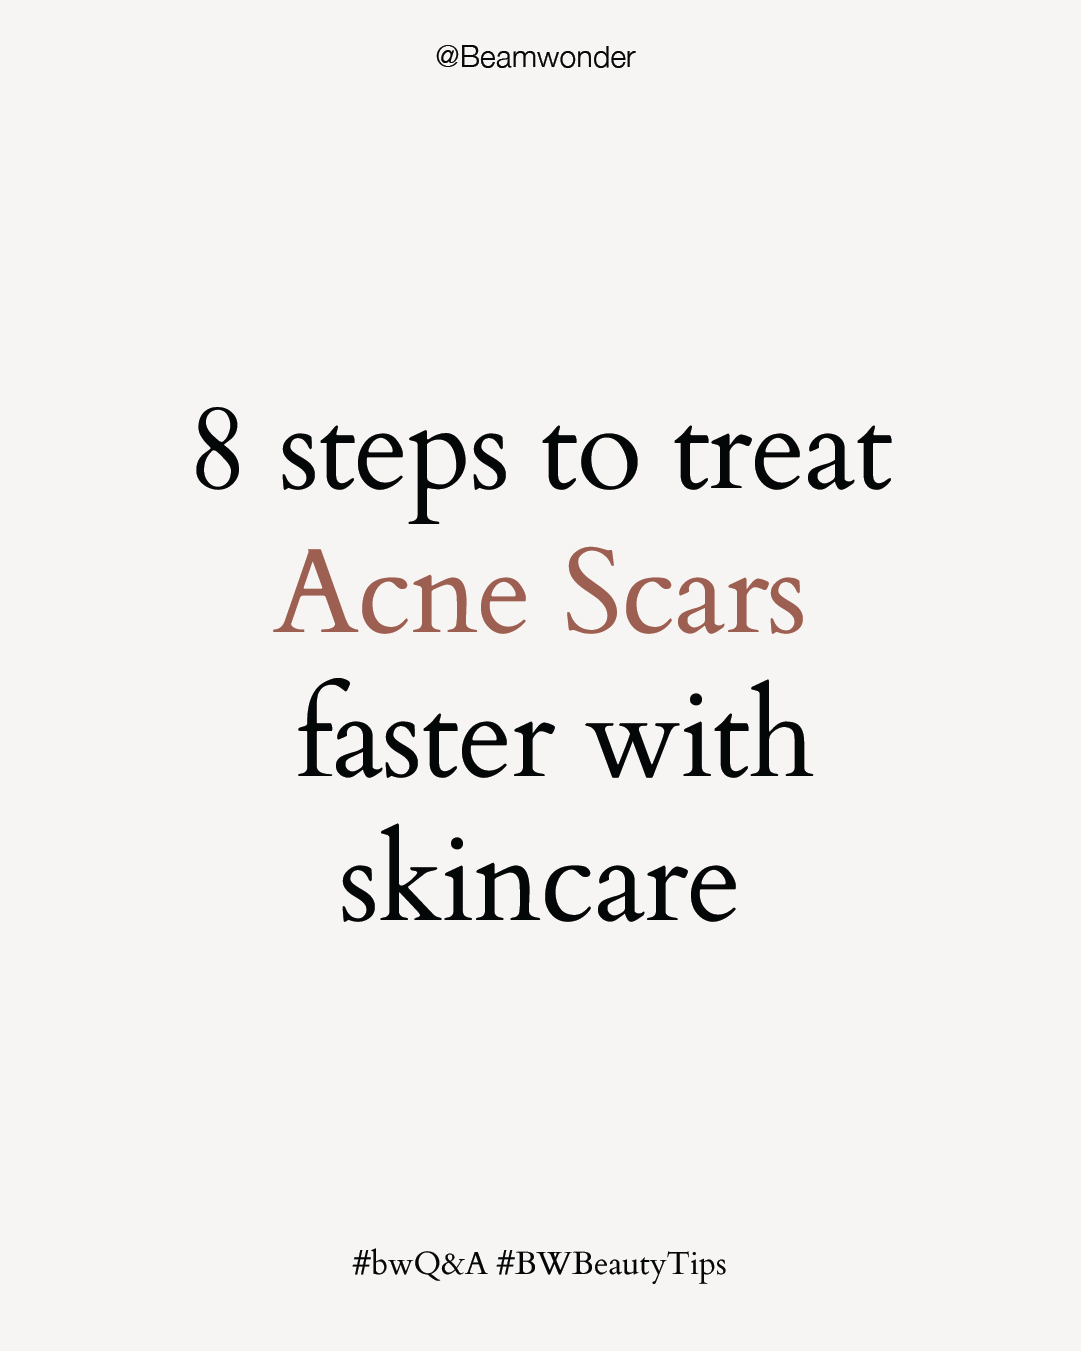 8 Steps to Treat Acne Scars